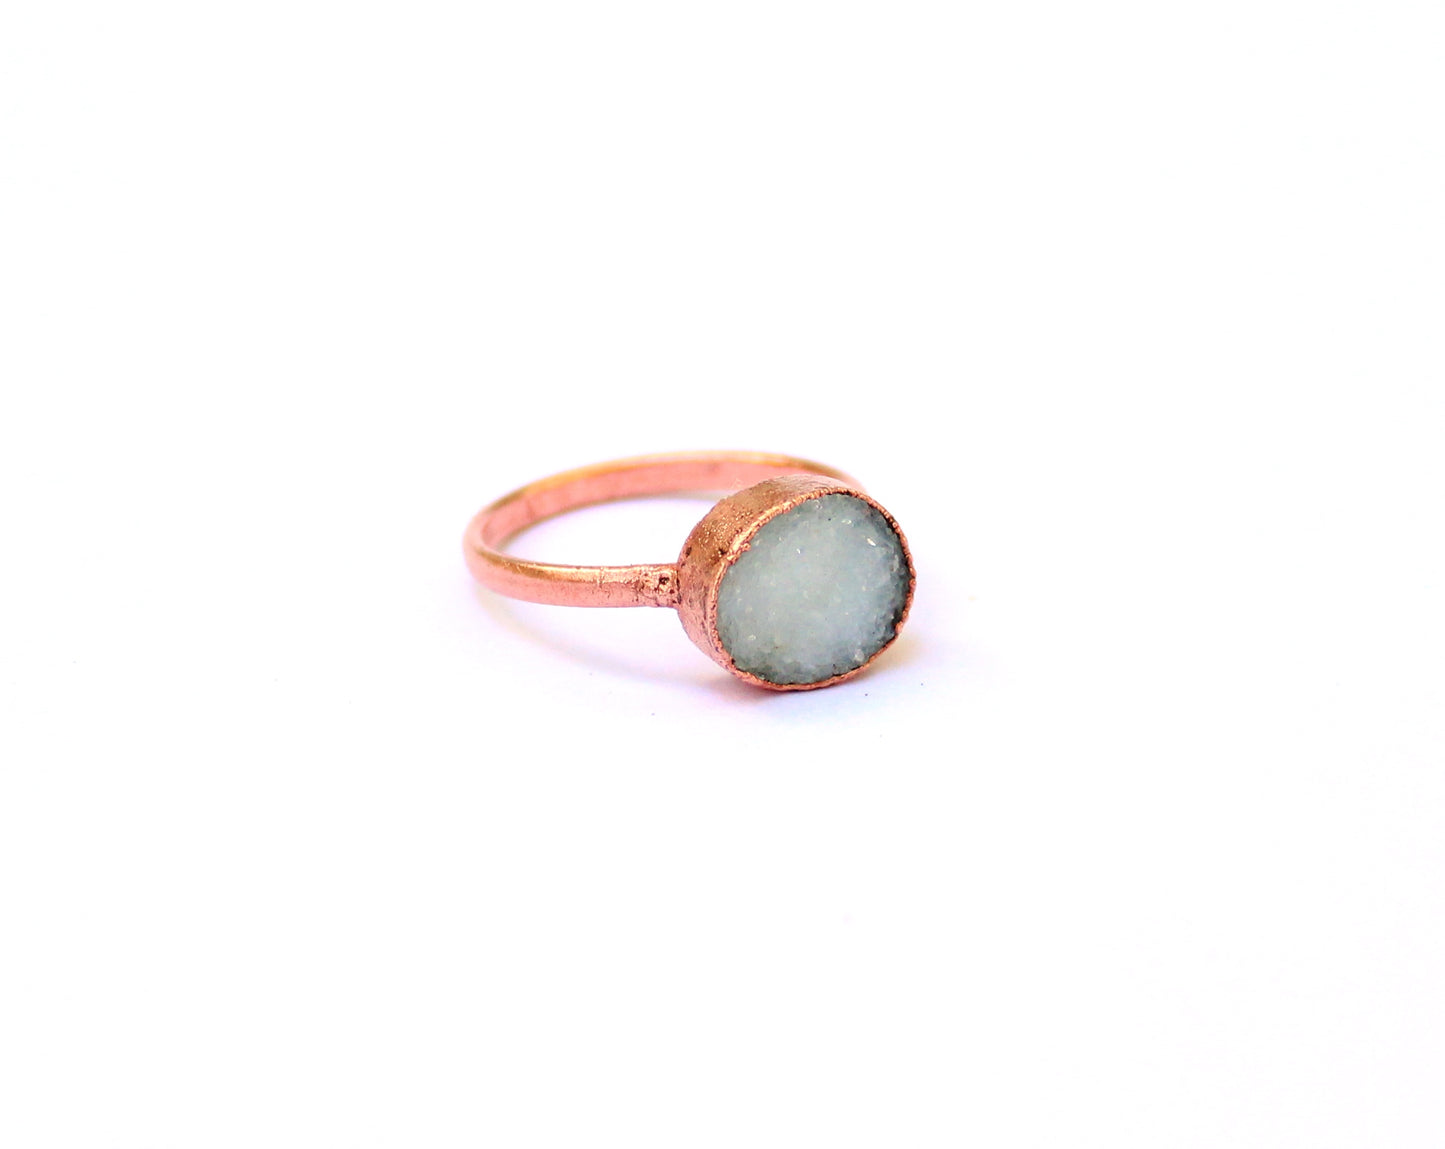 Large Oval Druzy Solitaire Ring (Horizontal)